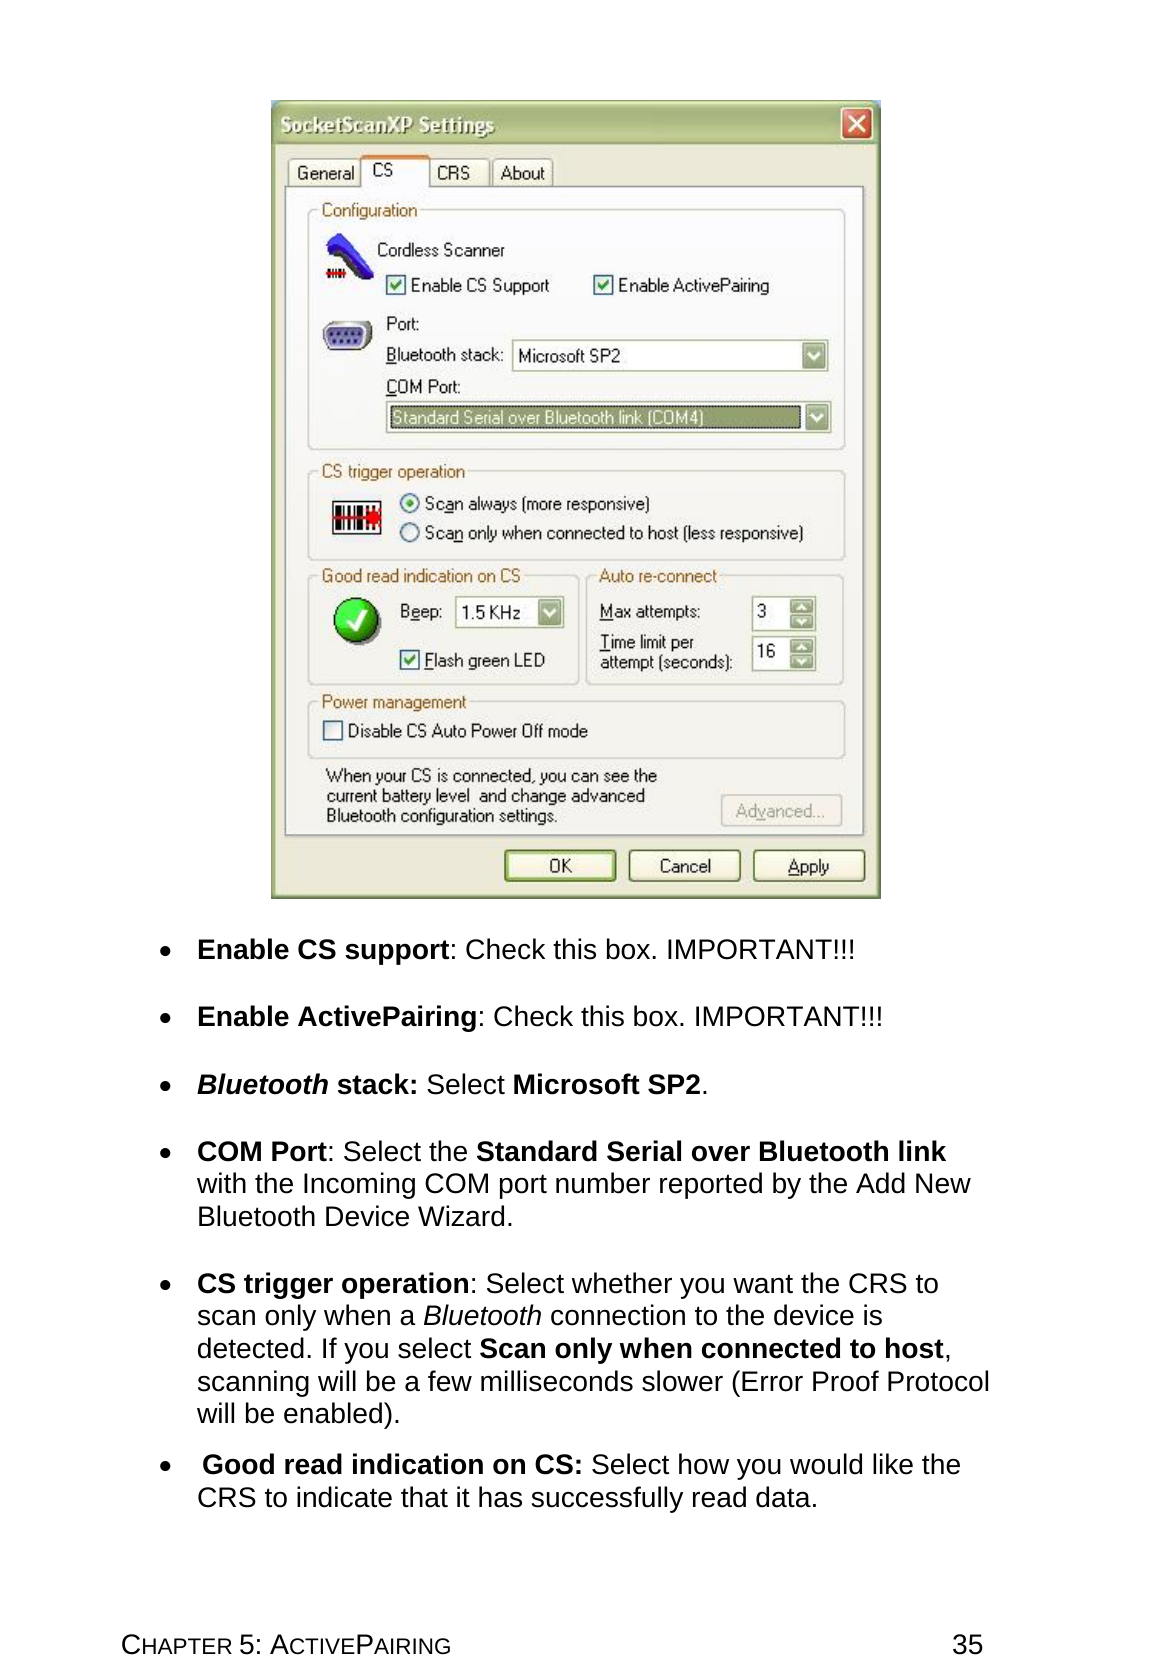 CHAPTER 5: ACTIVEPAIRING 35    •  Enable CS support: Check this box. IMPORTANT!!!  •  Enable ActivePairing: Check this box. IMPORTANT!!!  •  Bluetooth stack: Select Microsoft SP2.   •  COM Port: Select the Standard Serial over Bluetooth link with the Incoming COM port number reported by the Add New Bluetooth Device Wizard.  •  CS trigger operation: Select whether you want the CRS to scan only when a Bluetooth connection to the device is detected. If you select Scan only when connected to host, scanning will be a few milliseconds slower (Error Proof Protocol will be enabled).  •   Good read indication on CS: Select how you would like the CRS to indicate that it has successfully read data. 